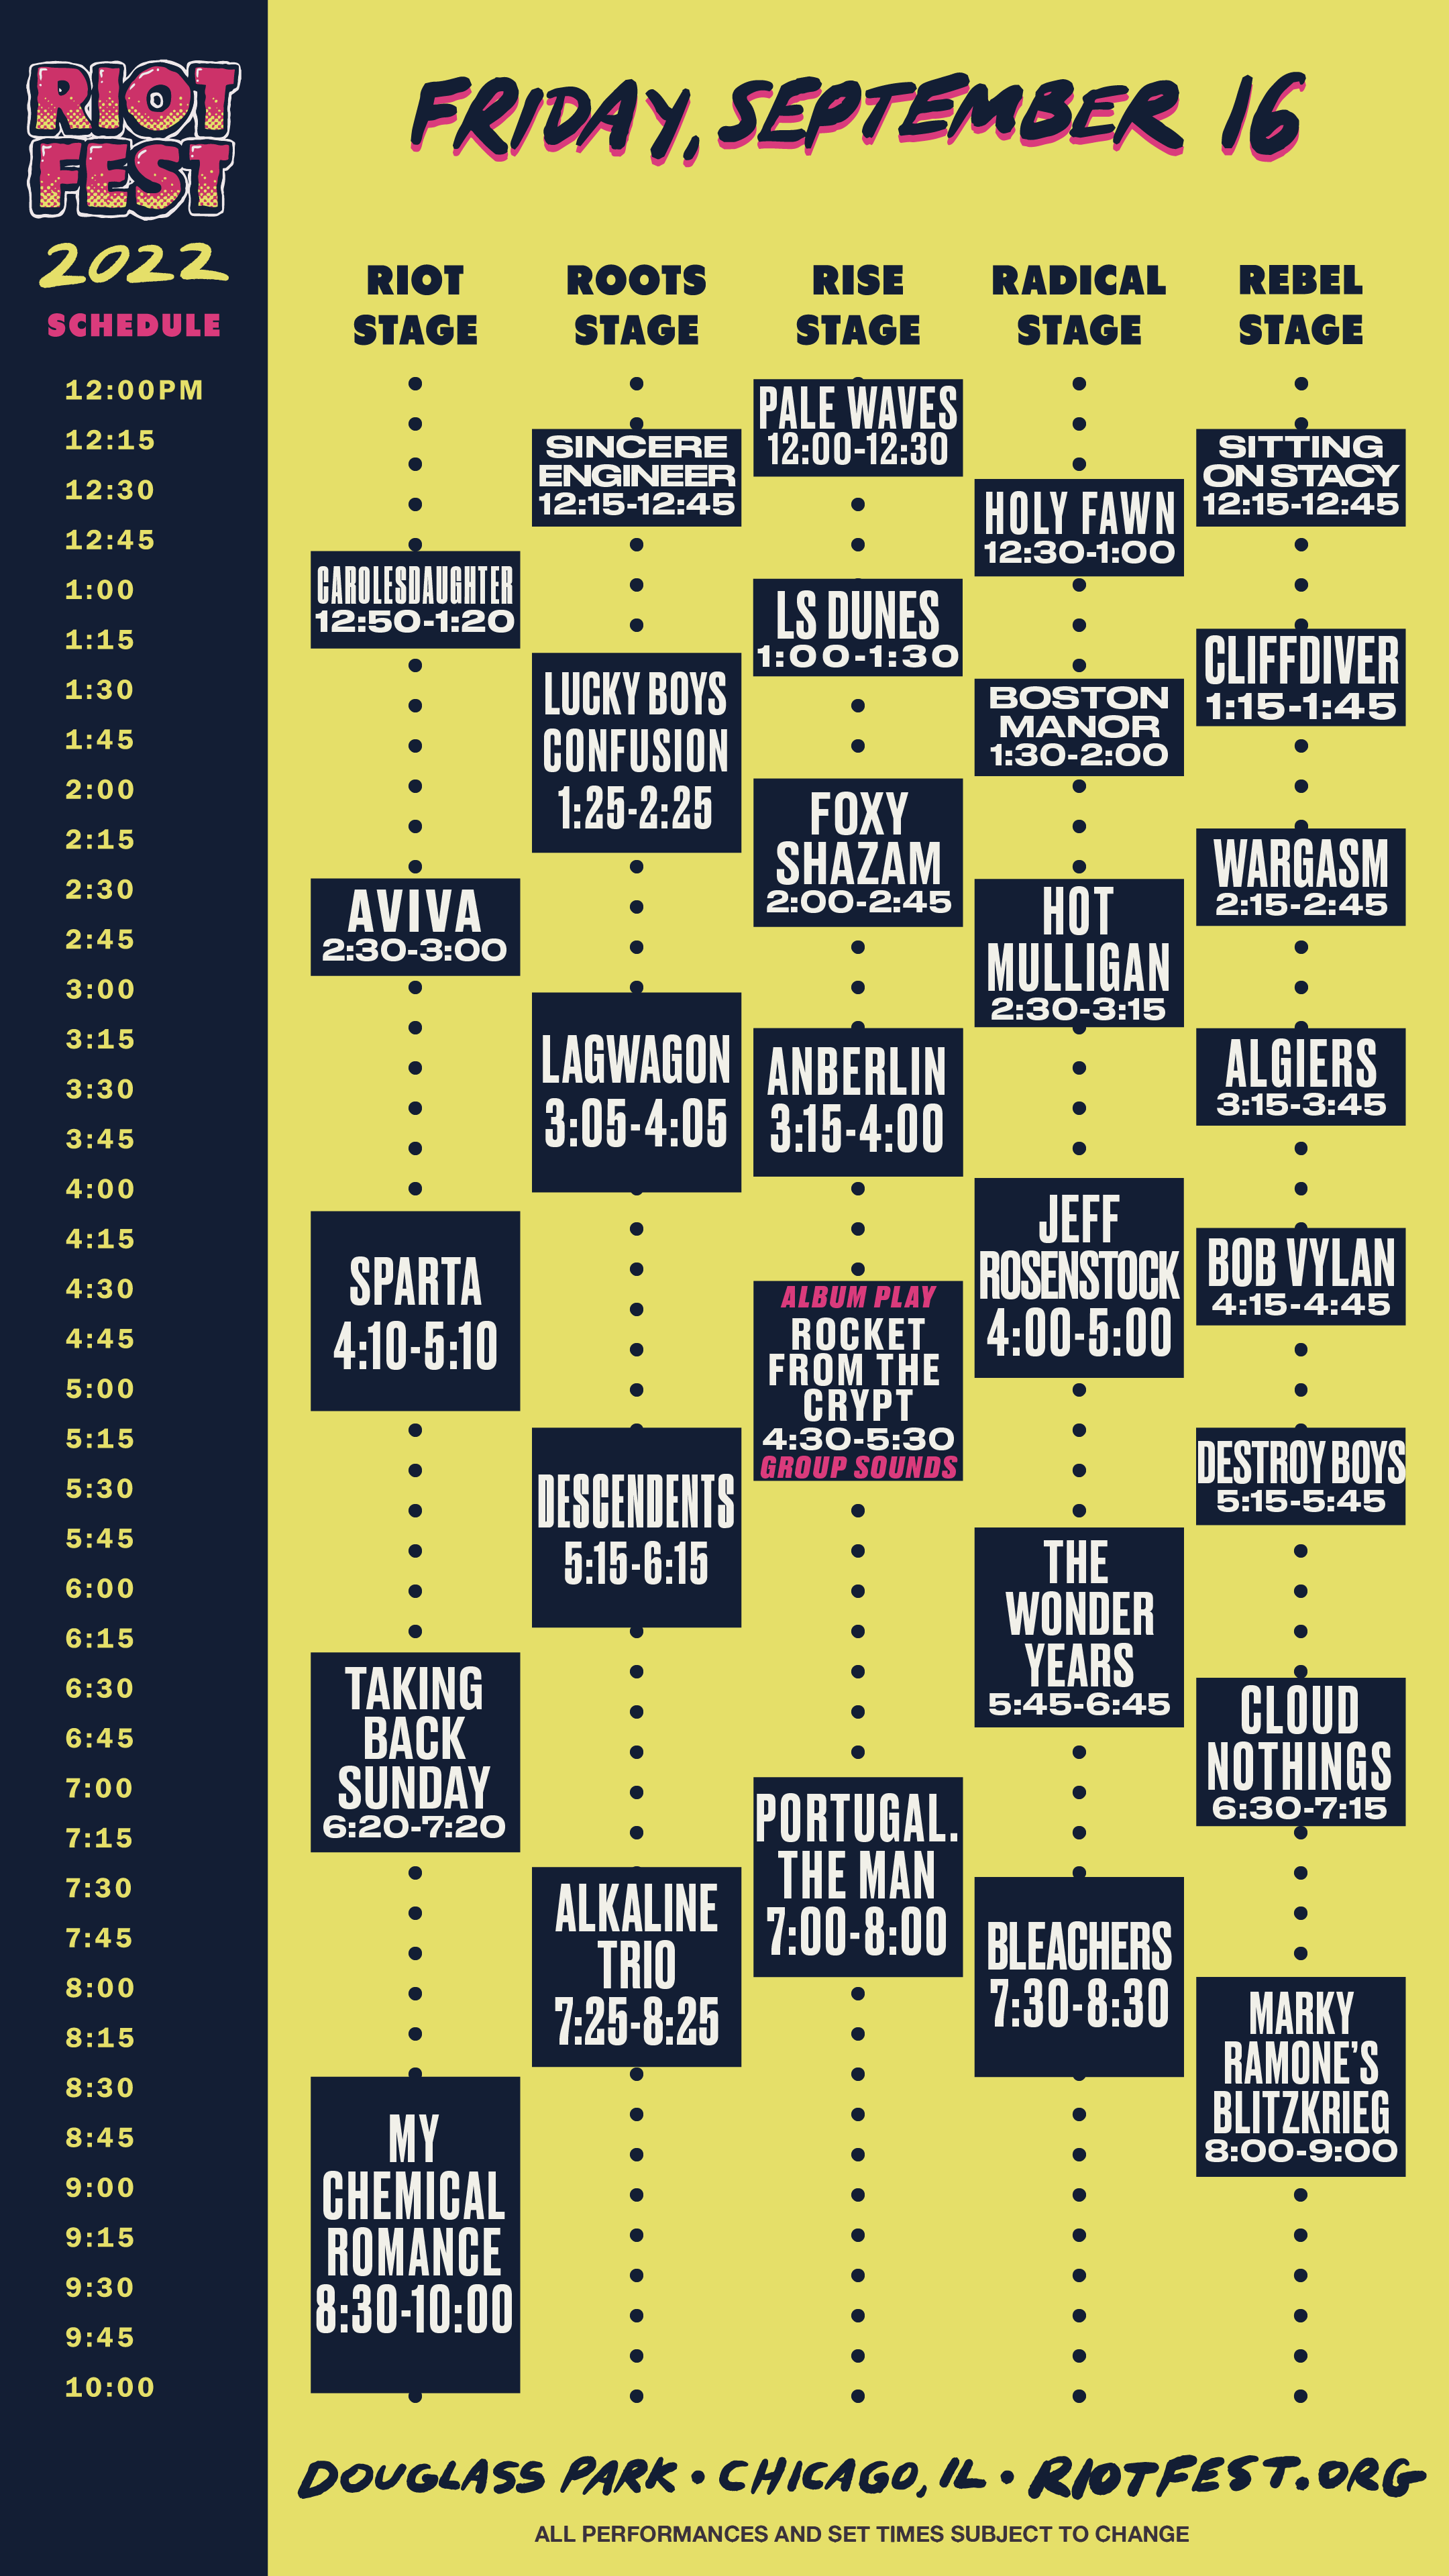 Riot Fest 2022 Friday Schedule - September 16th